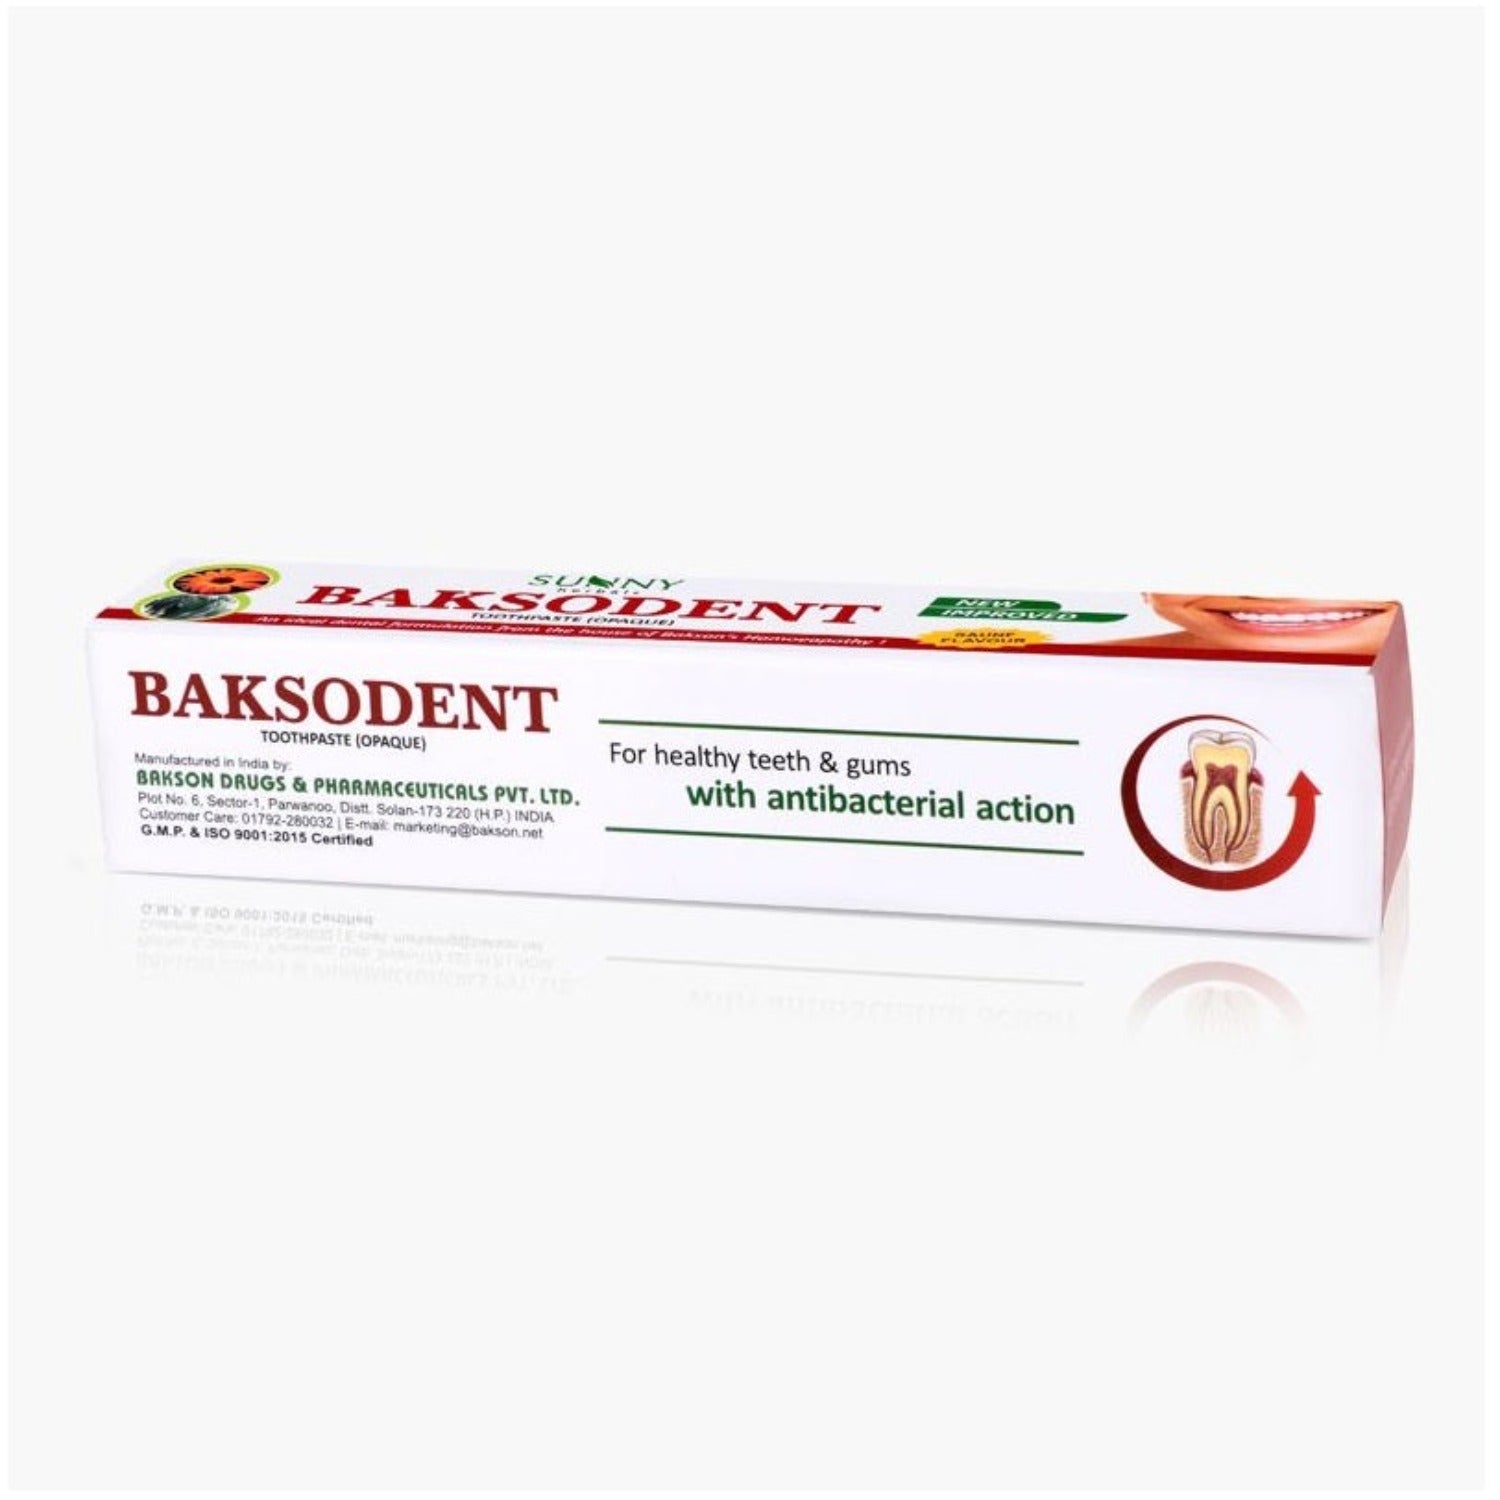 Bakson's Sunny Herbals Baksodent Oral Care With Antibacterial Action Toothpaste Opaque 100G